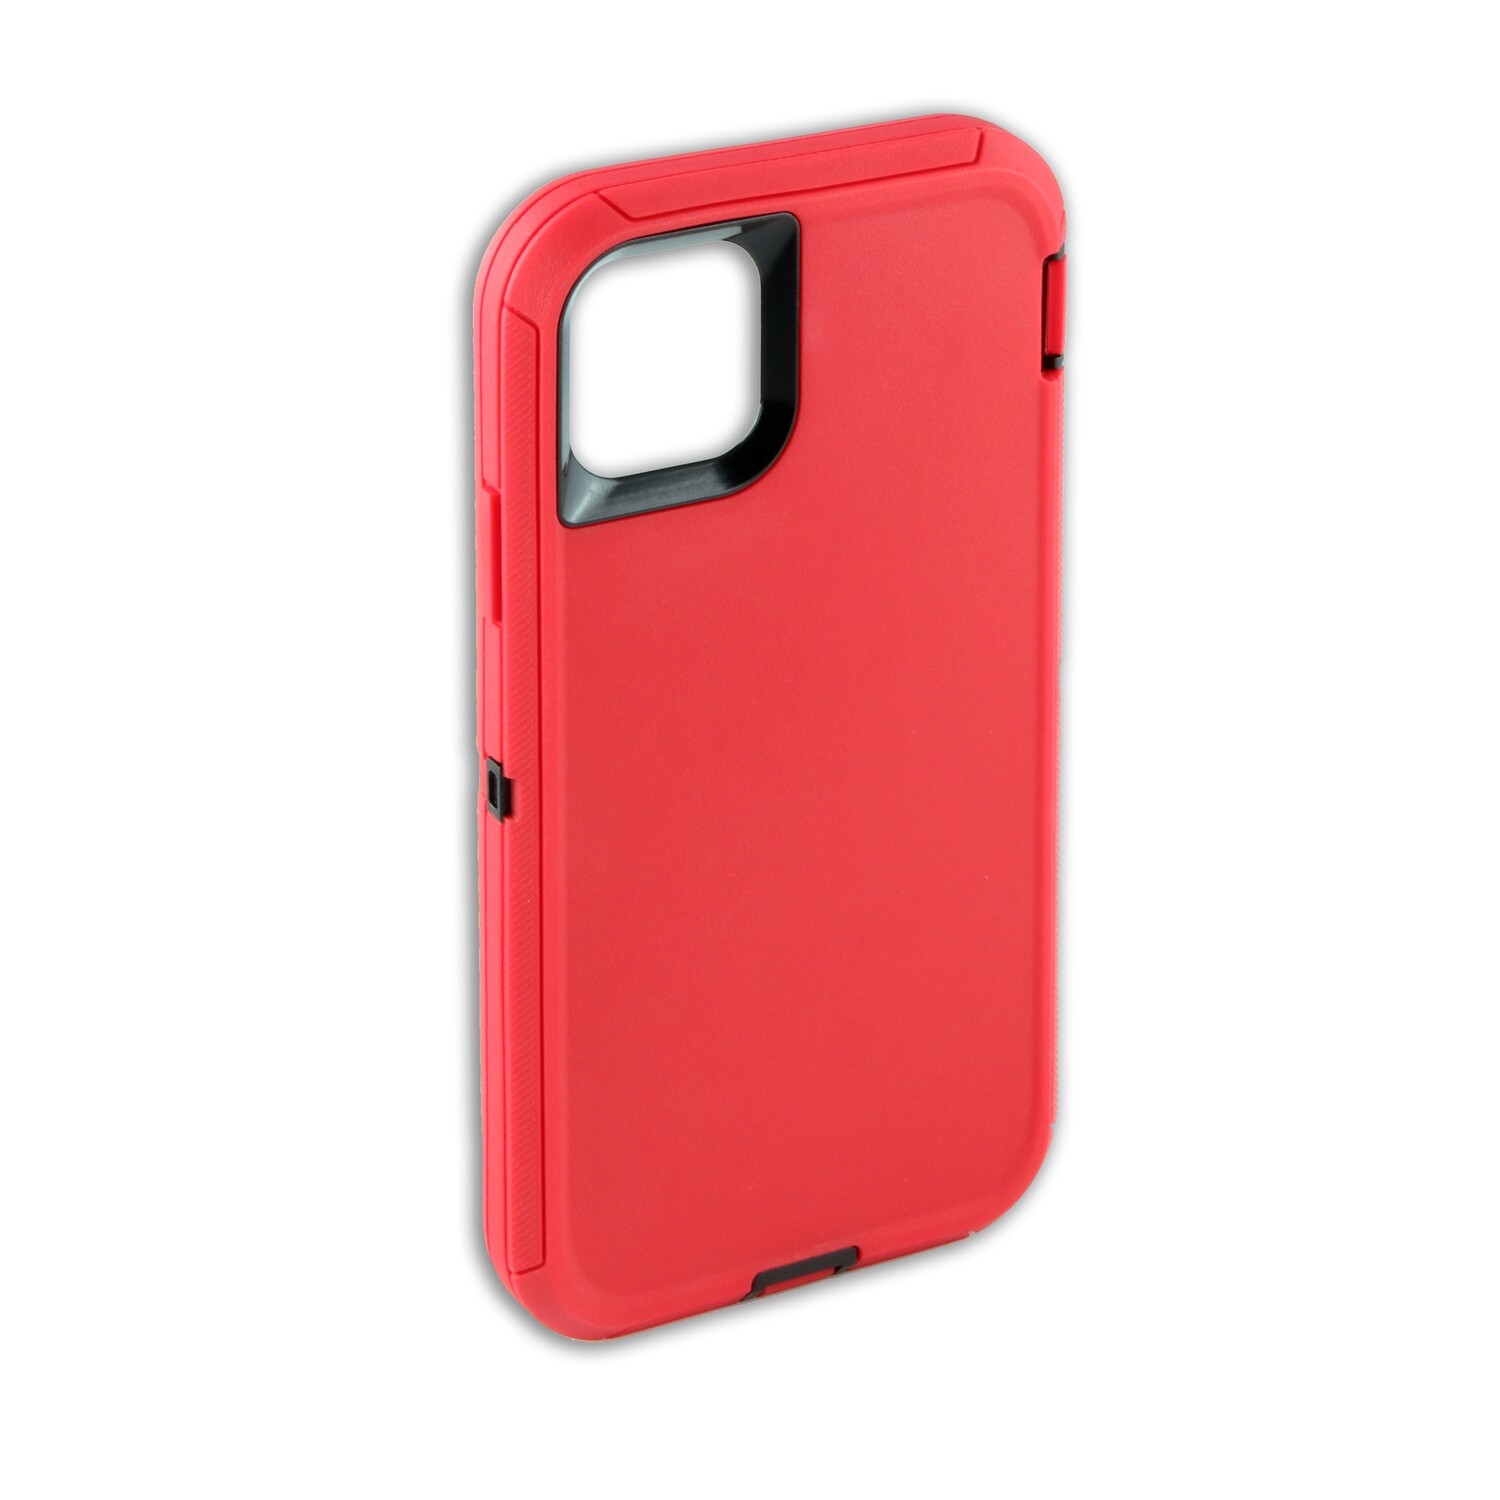 iPhone 12 Mini 5.4 Tough Guardian Robot ShockProof Case, Color: Red